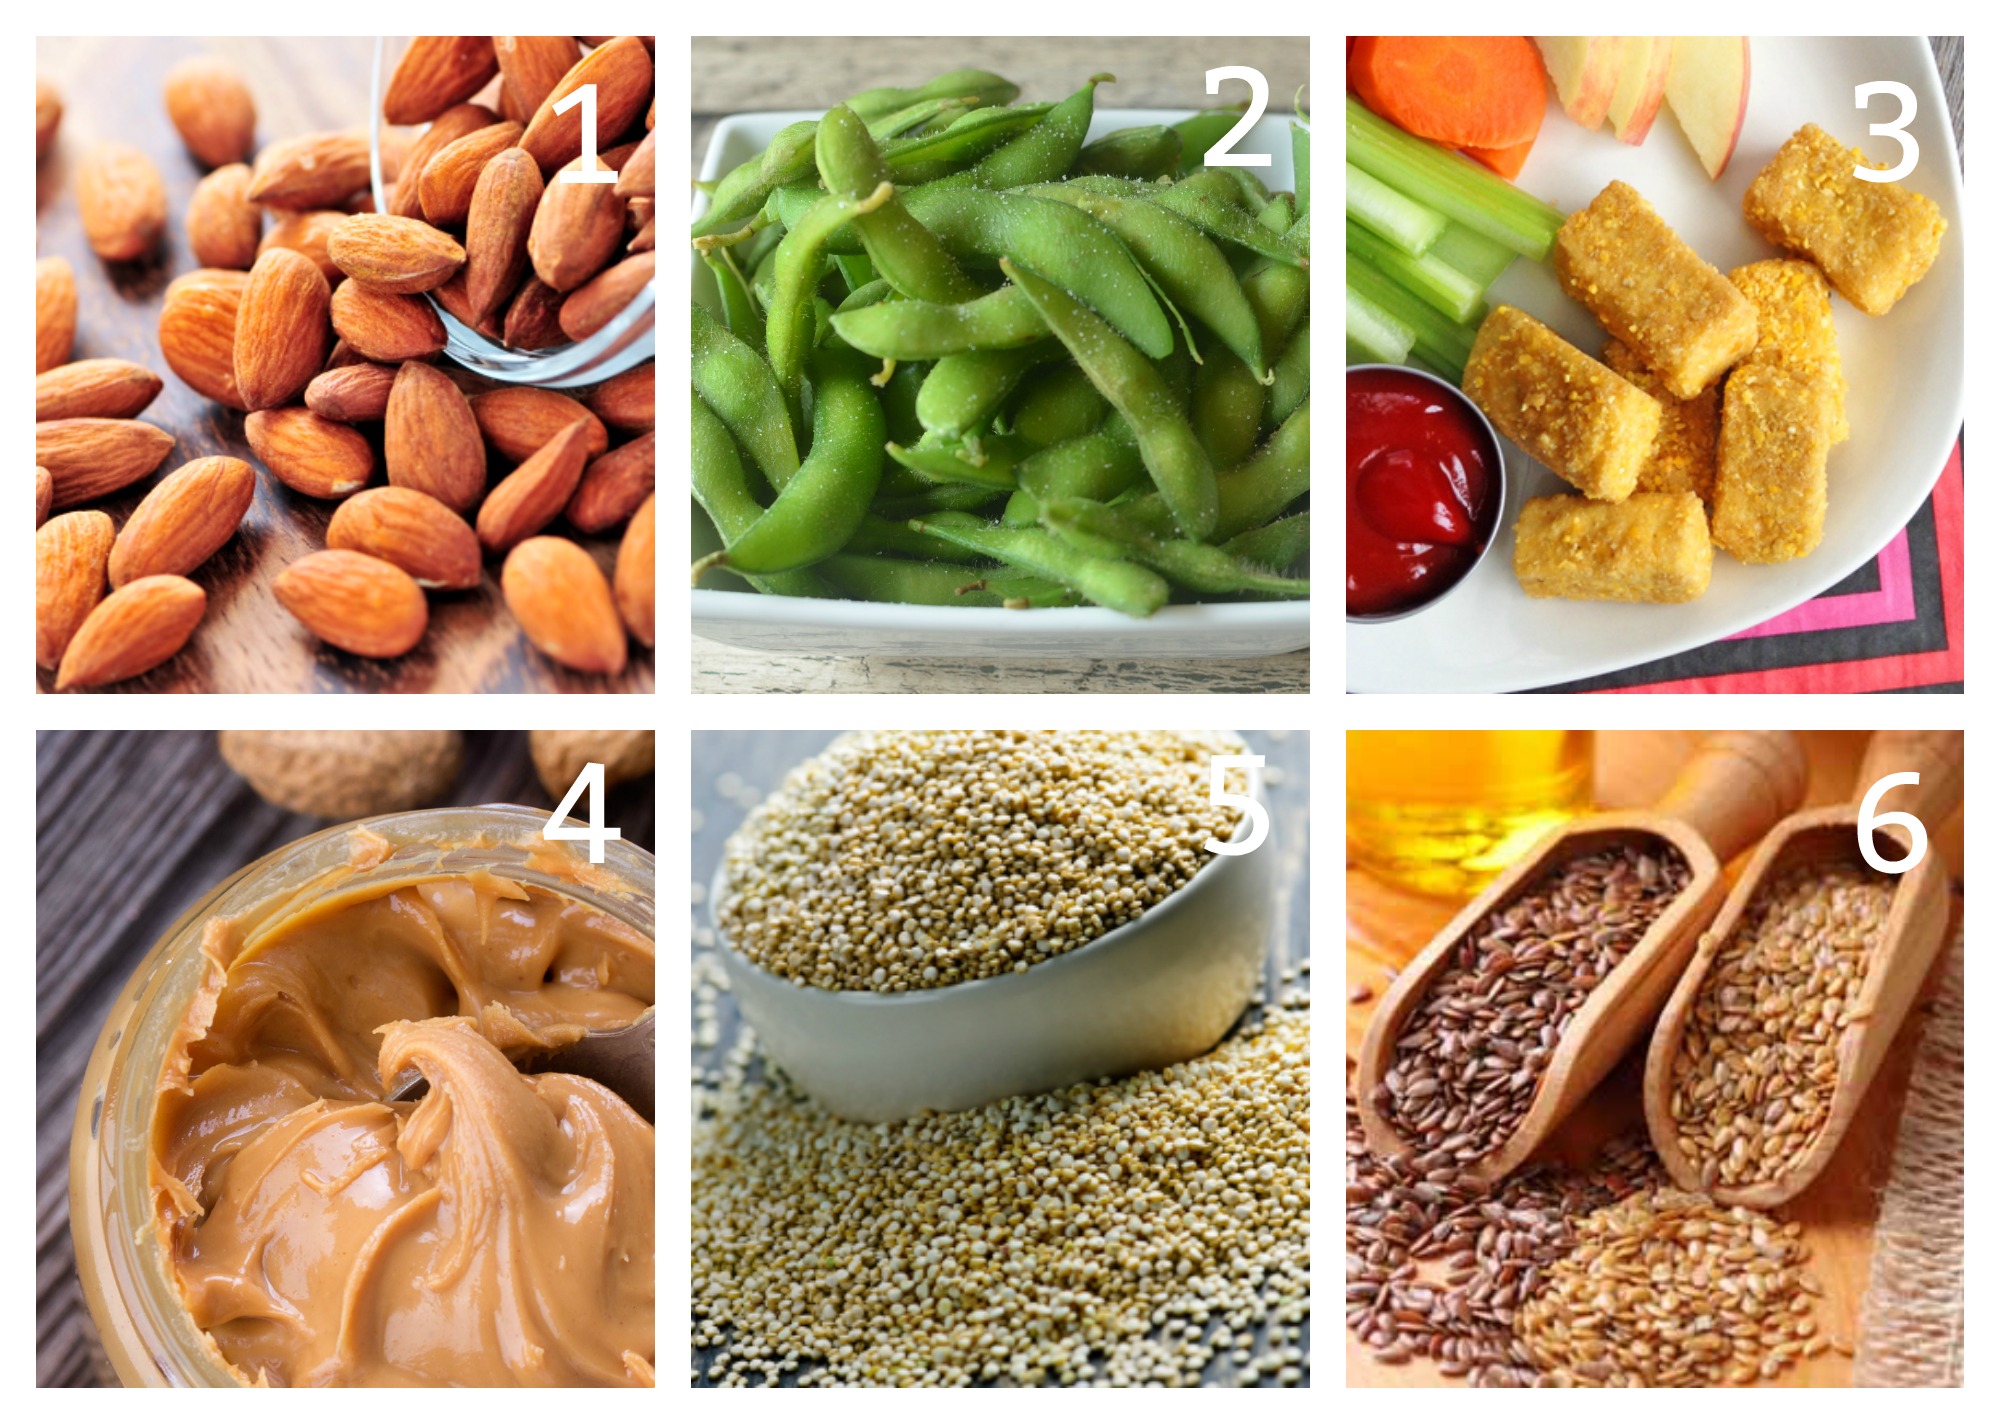 Family and Parenting: 12 Non-Meat Protein Sources for Kids